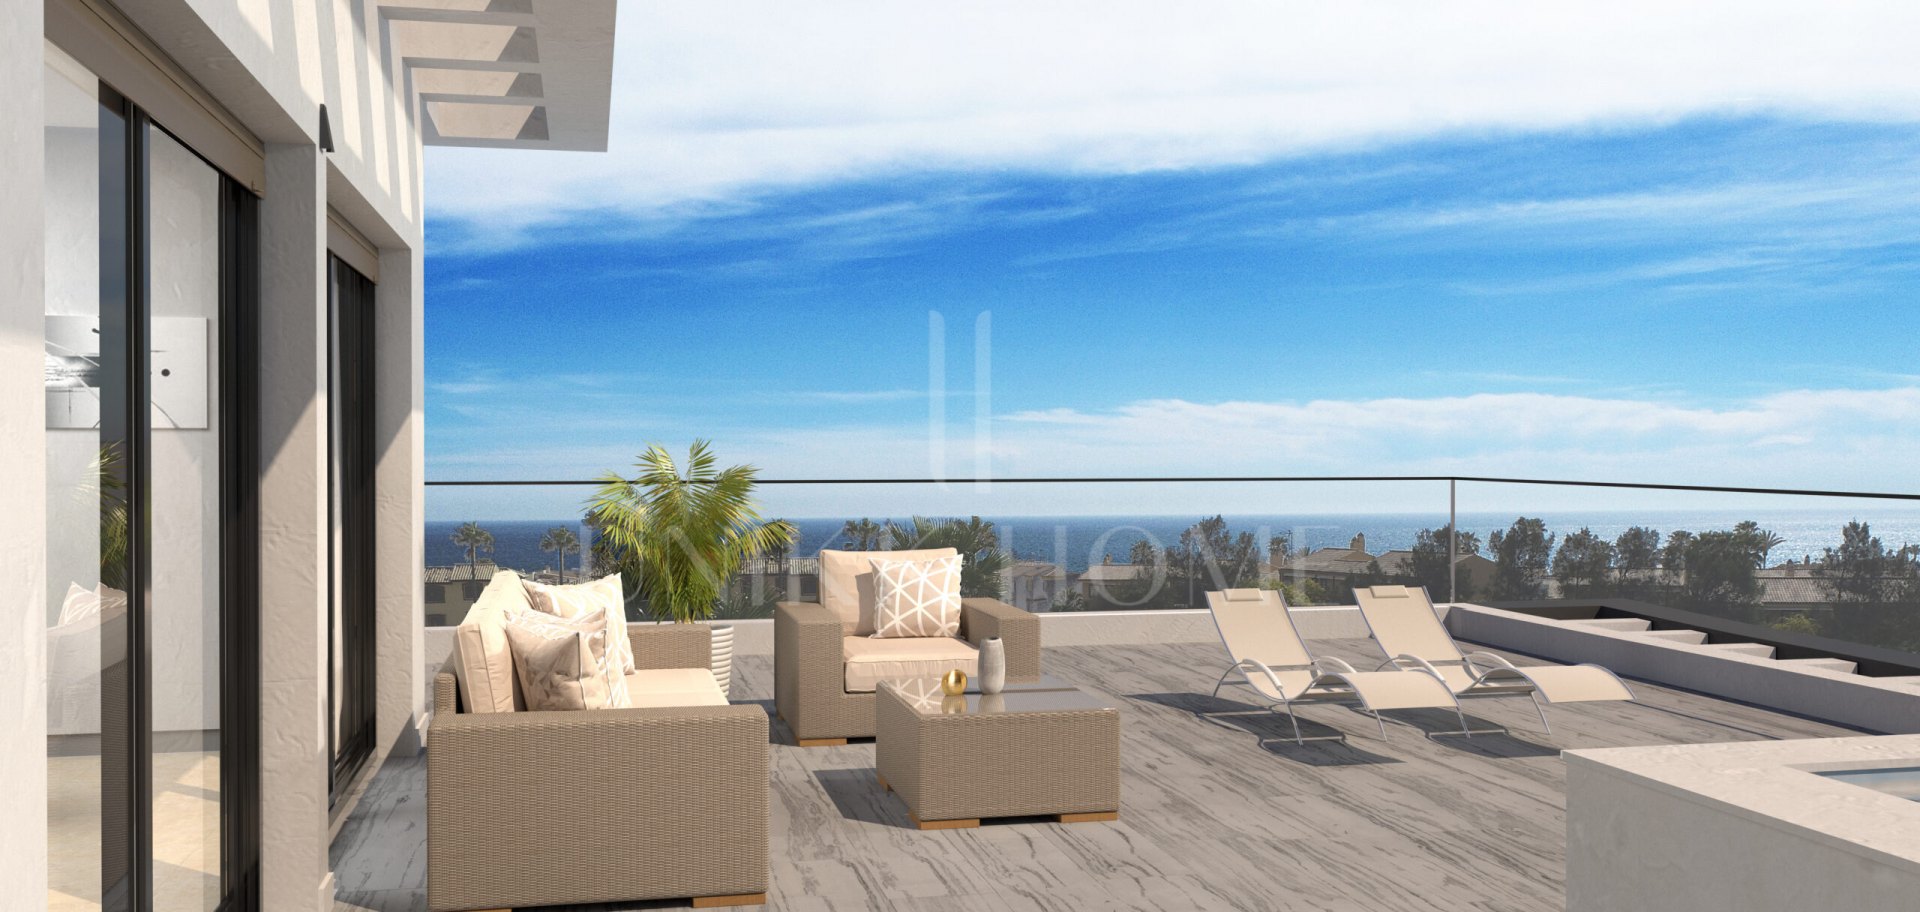 BRAND NEW PENTHOUSE WITH PRIVATE POOL AND SEA VIEWS WALKING DISTANCE TO THE CASARES BEACH